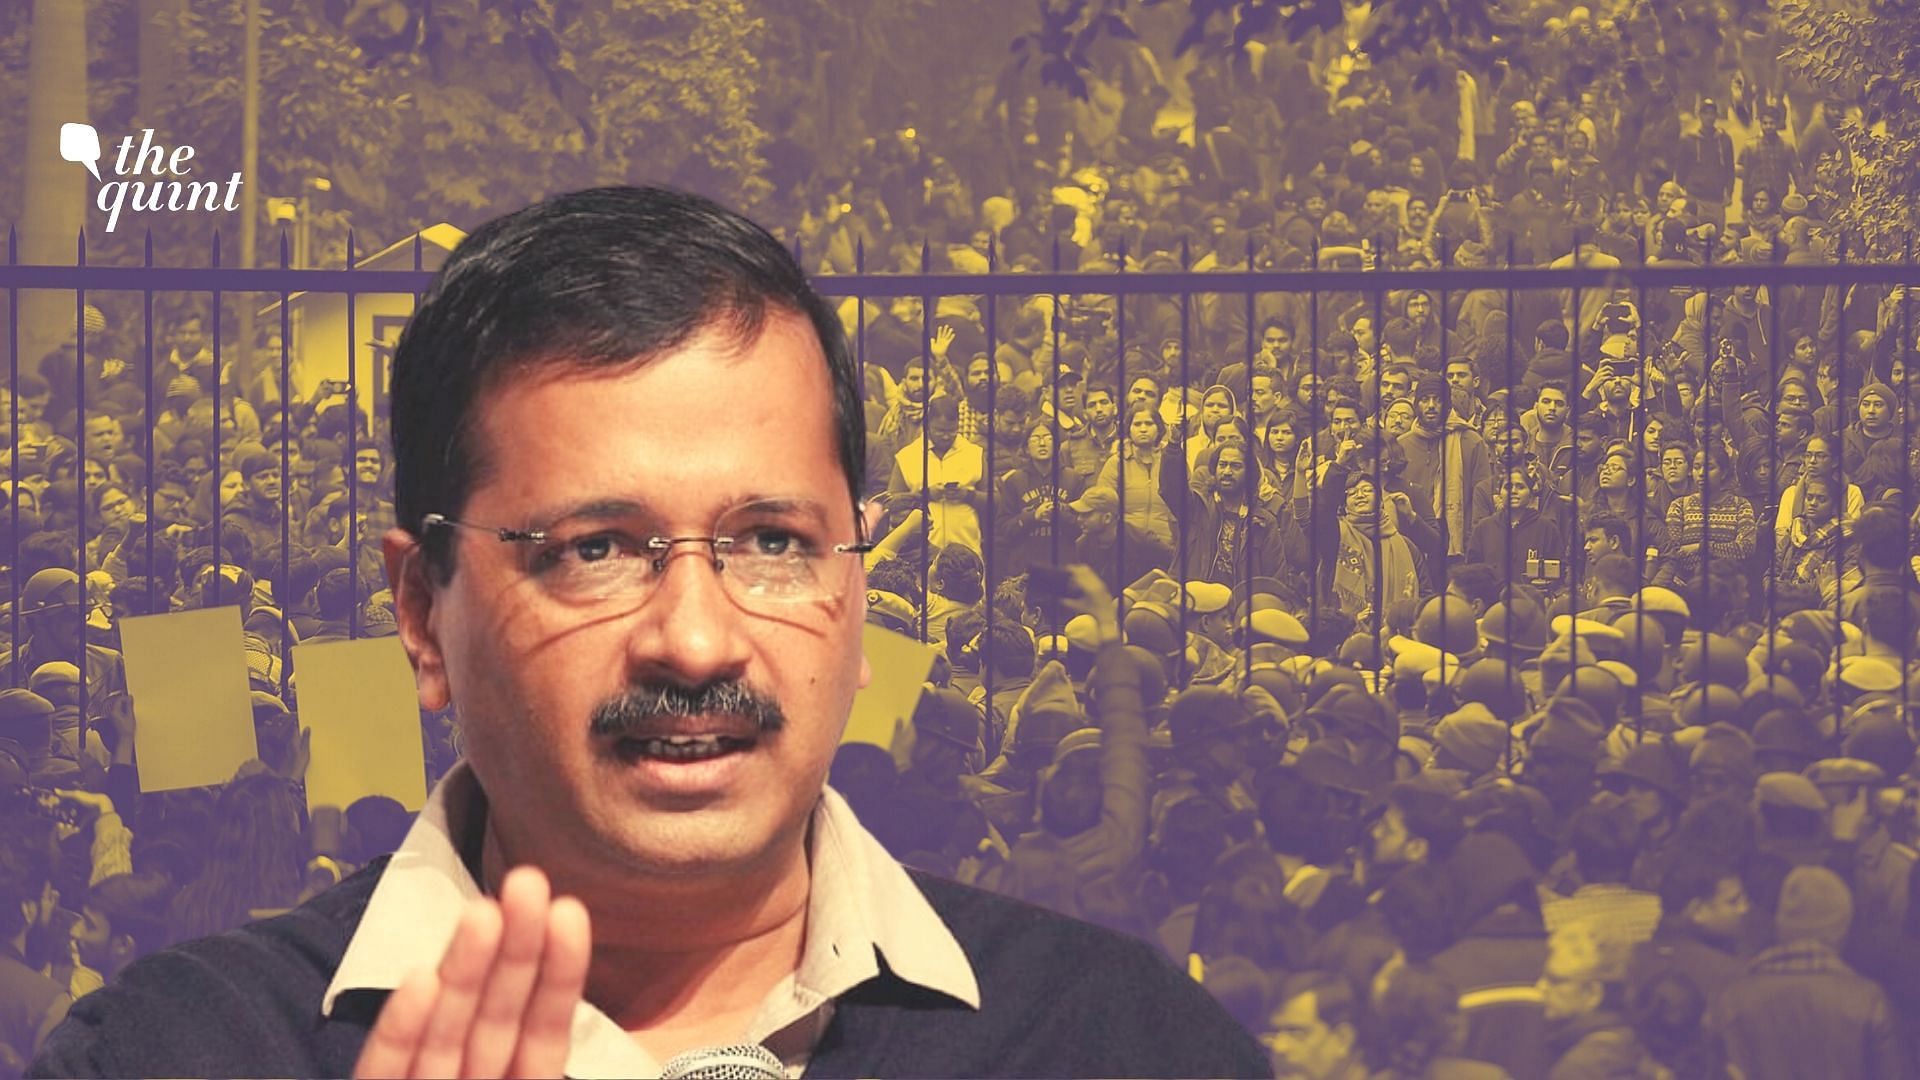 Kejriwal has been receiving flak for not visiting JNU after armed, masked men attacked students and teachers.